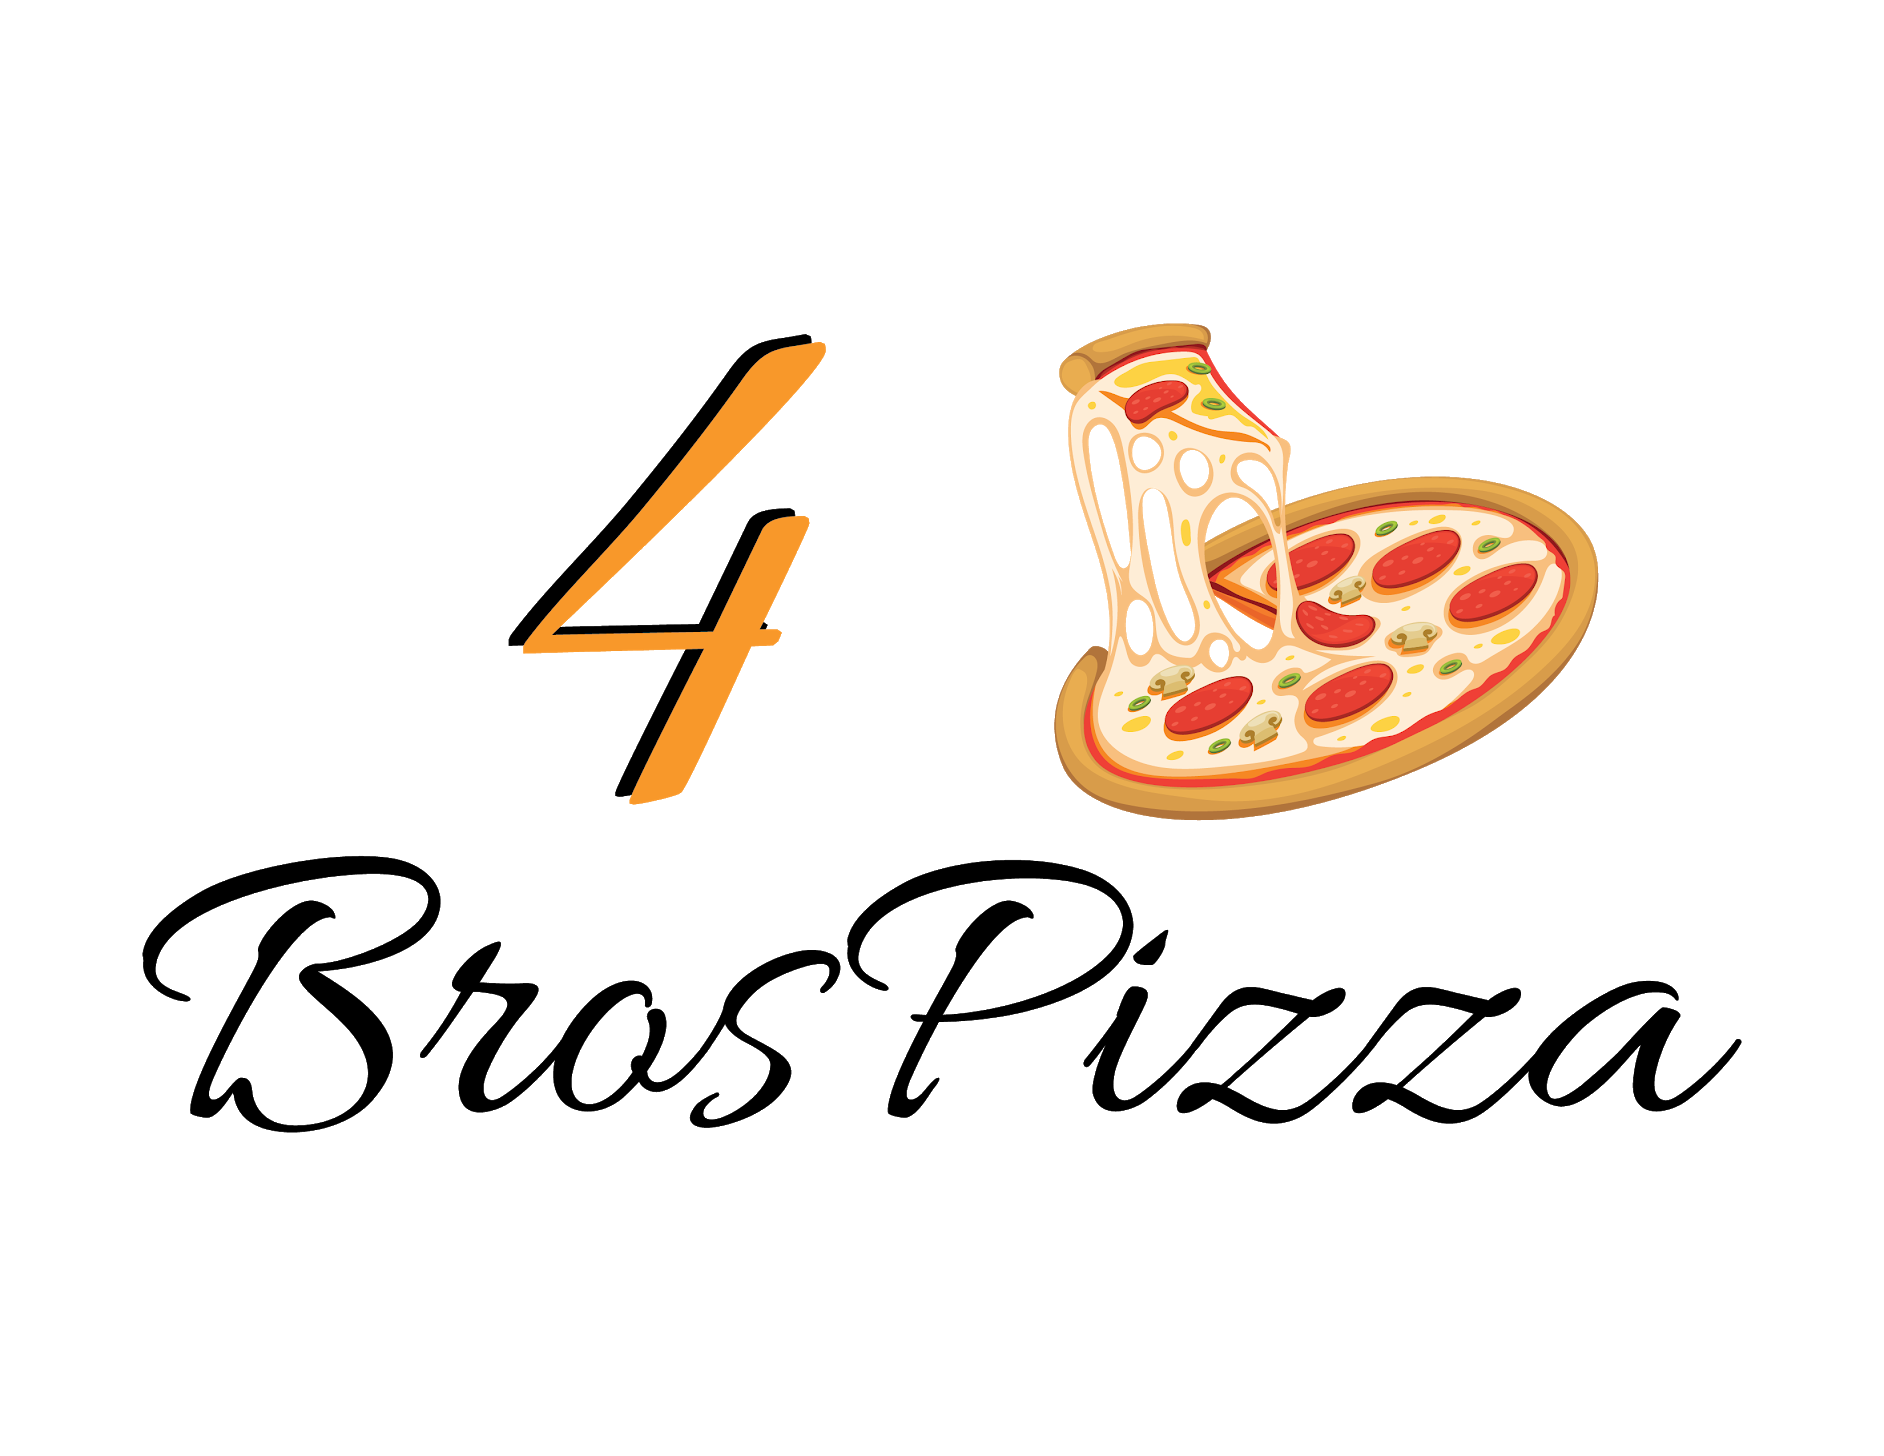 www.official4brospizza.com